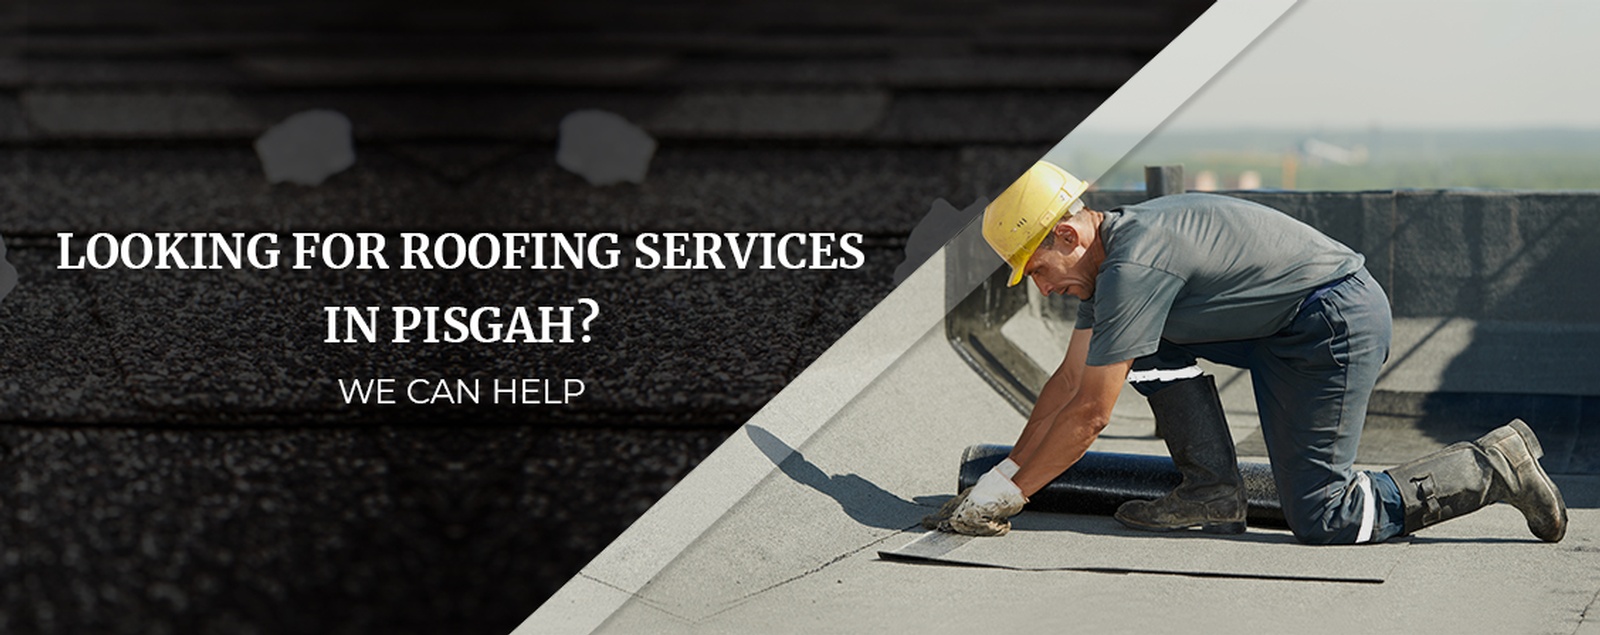 Looking For Roofing Services In Pisgah We Can Help